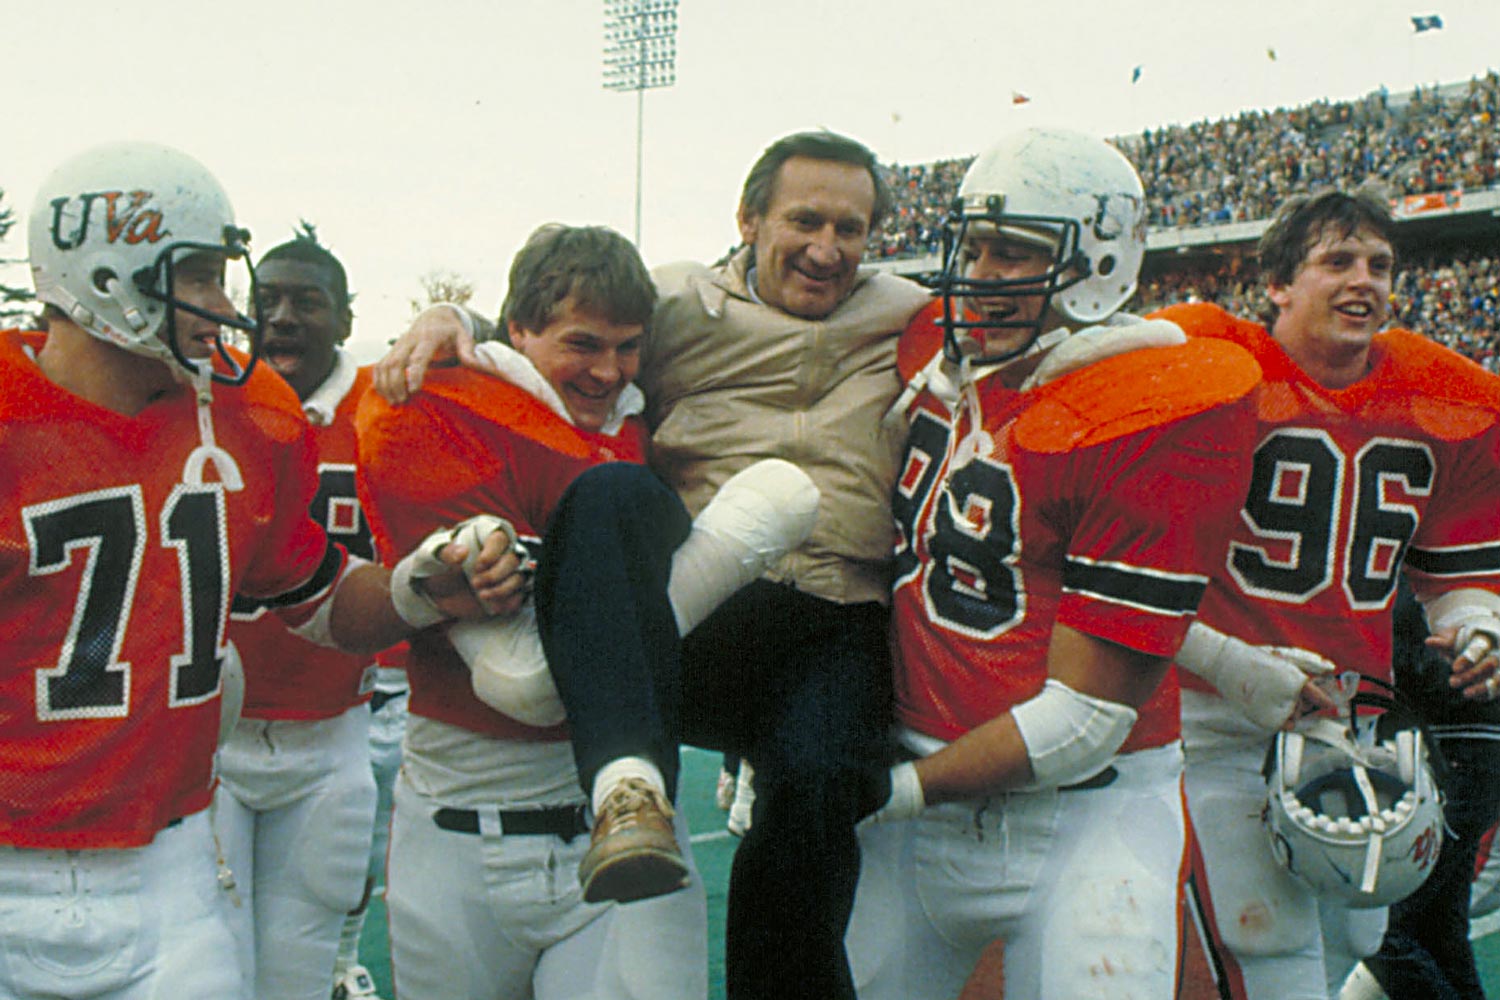 George Welsh being carried by the UVA football team after a game